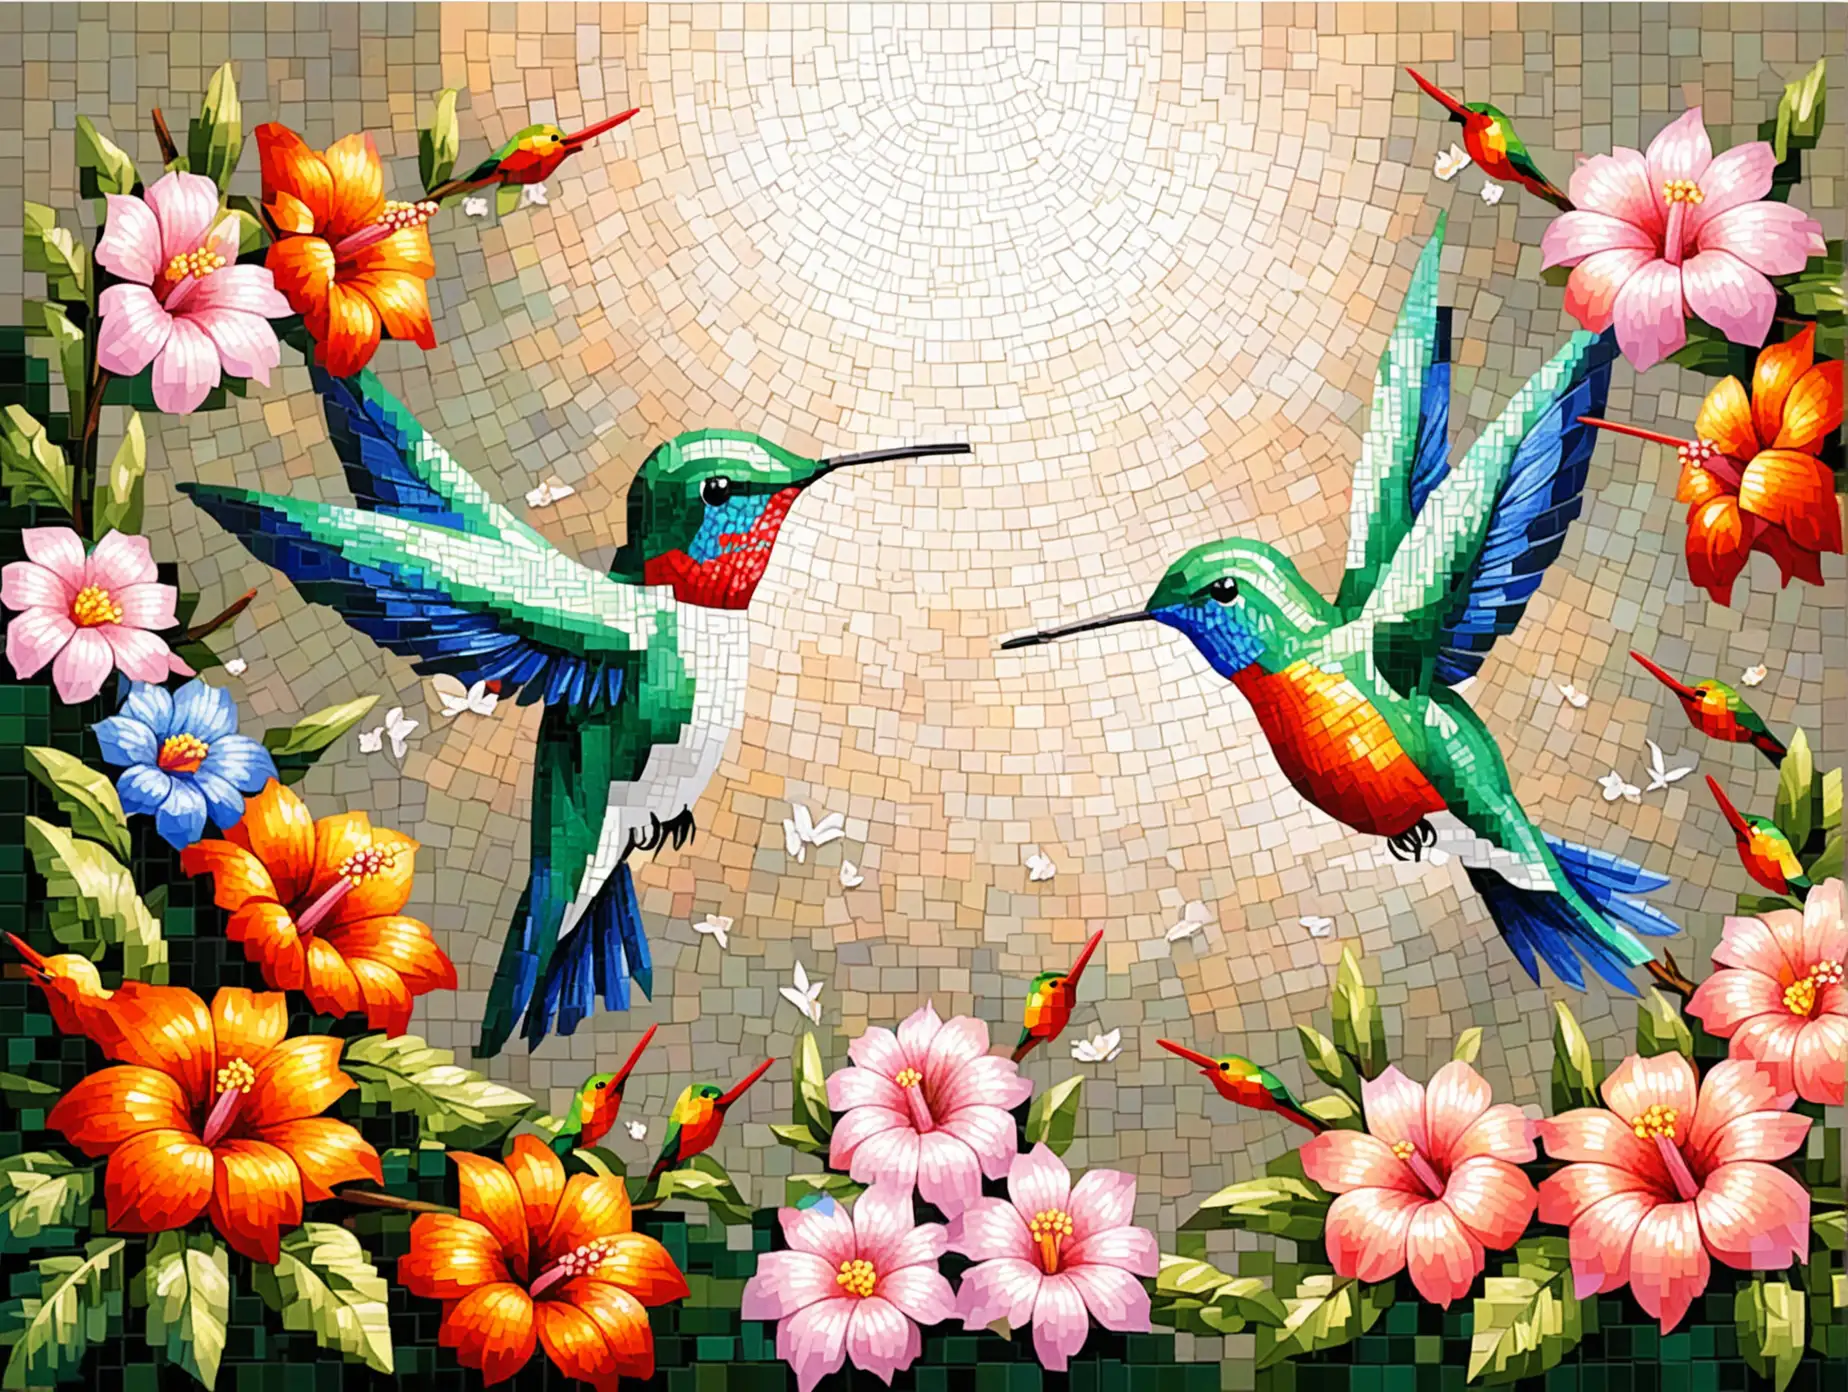 two small humming birds flying among the flowers painting mosaic